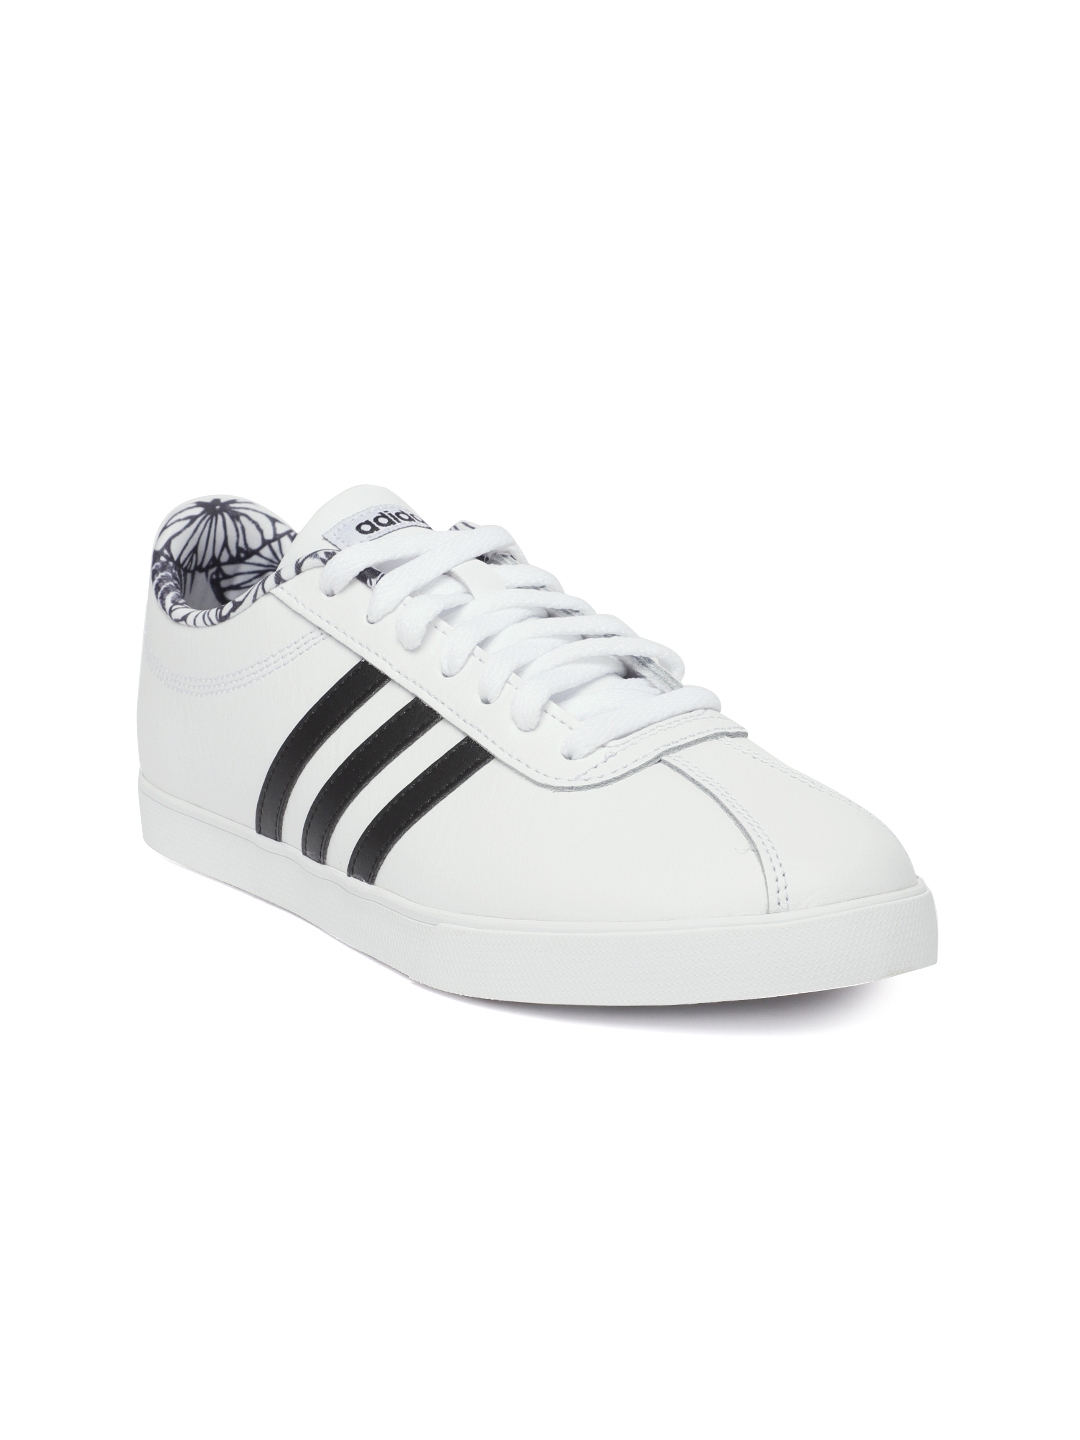 Buy ADIDAS Women White COURTSET Leather Tennis Shoes - Casual Shoes for ...